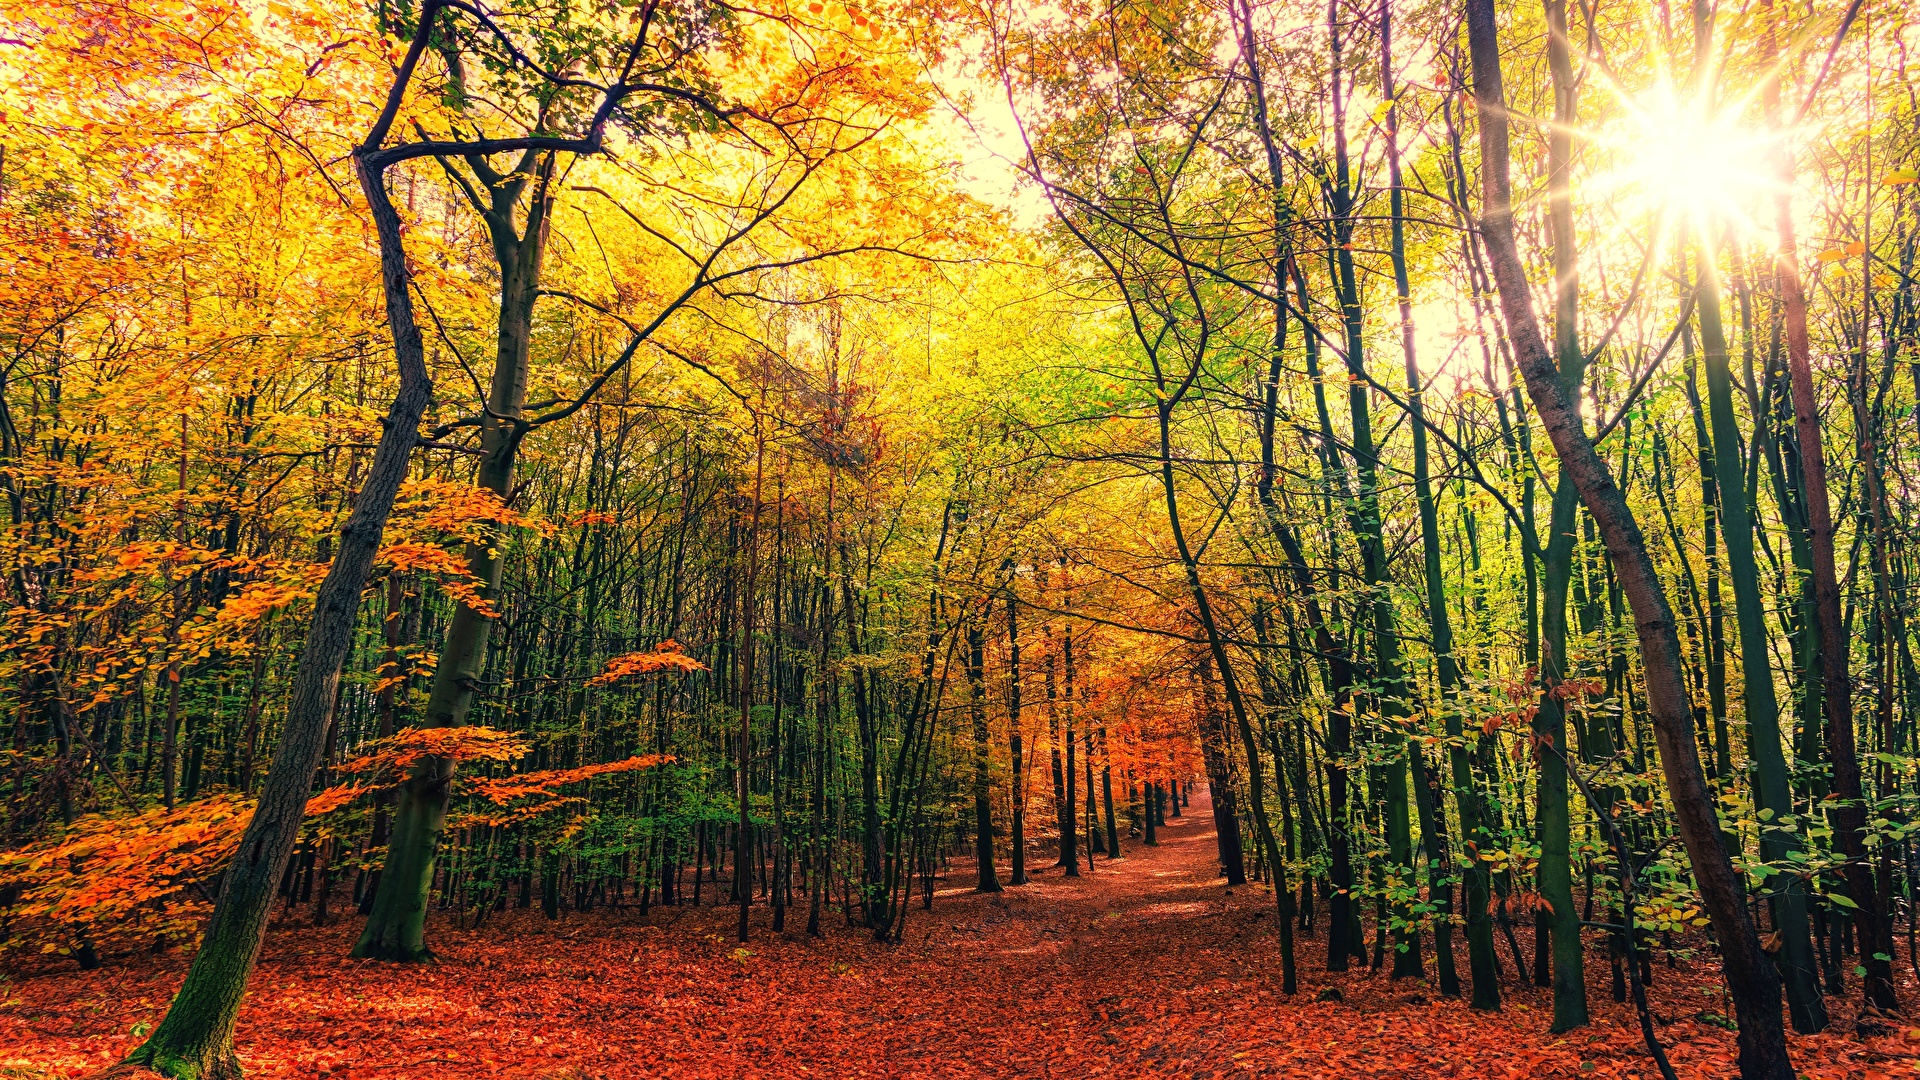 Image Rays Of Light Foliage Autumn Nature Forest Trees 1920x1080